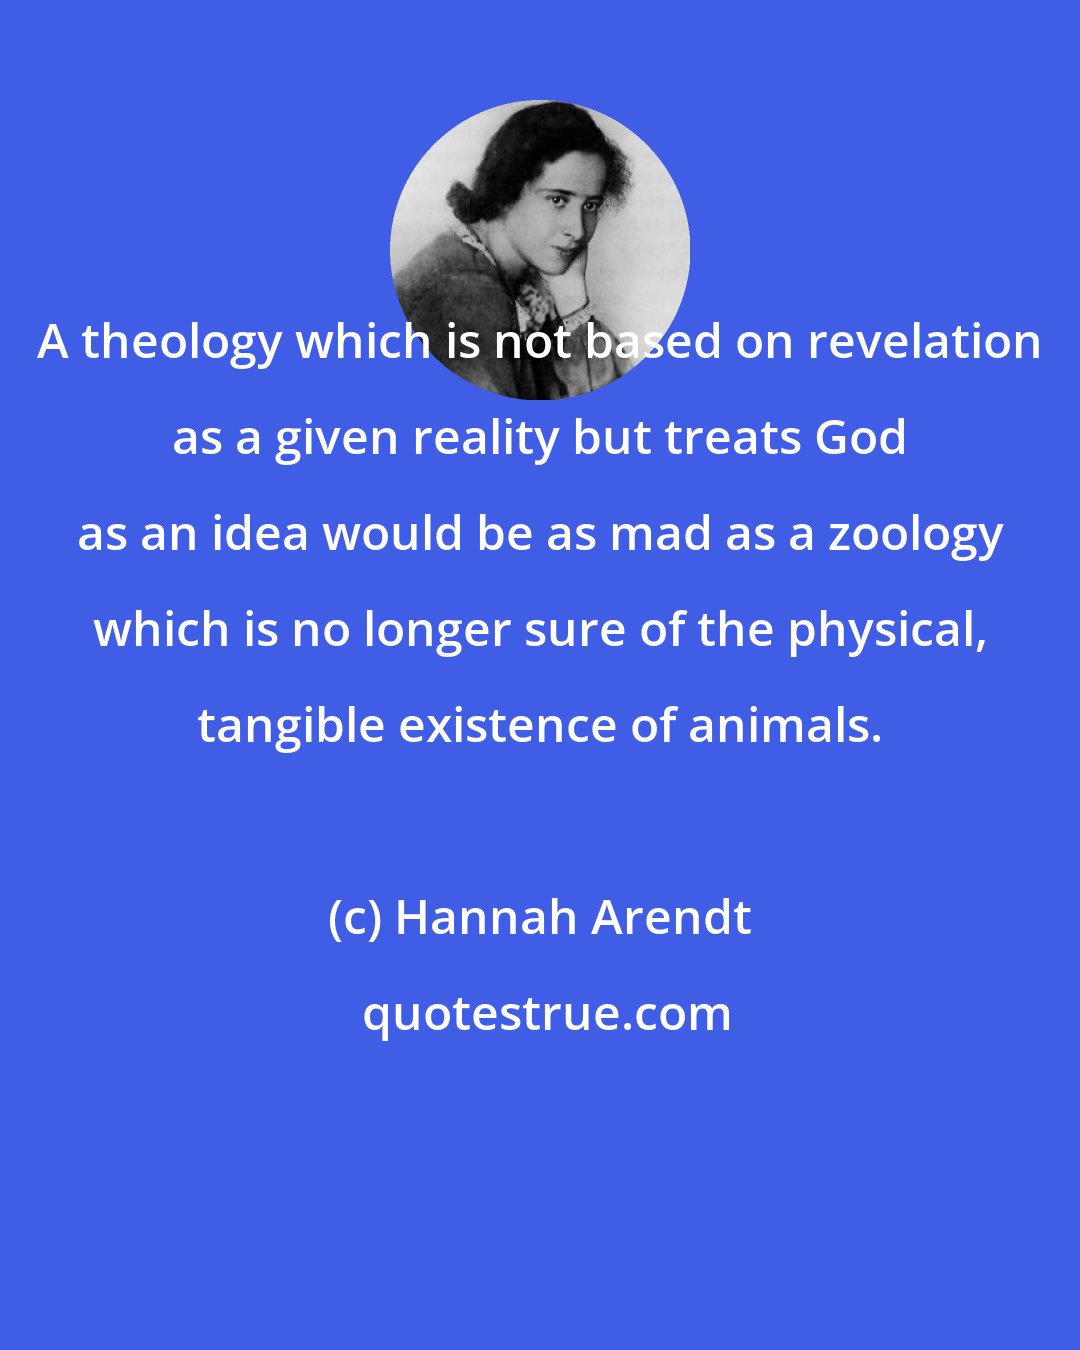 Hannah Arendt: A theology which is not based on revelation as a given reality but treats God as an idea would be as mad as a zoology which is no longer sure of the physical, tangible existence of animals.